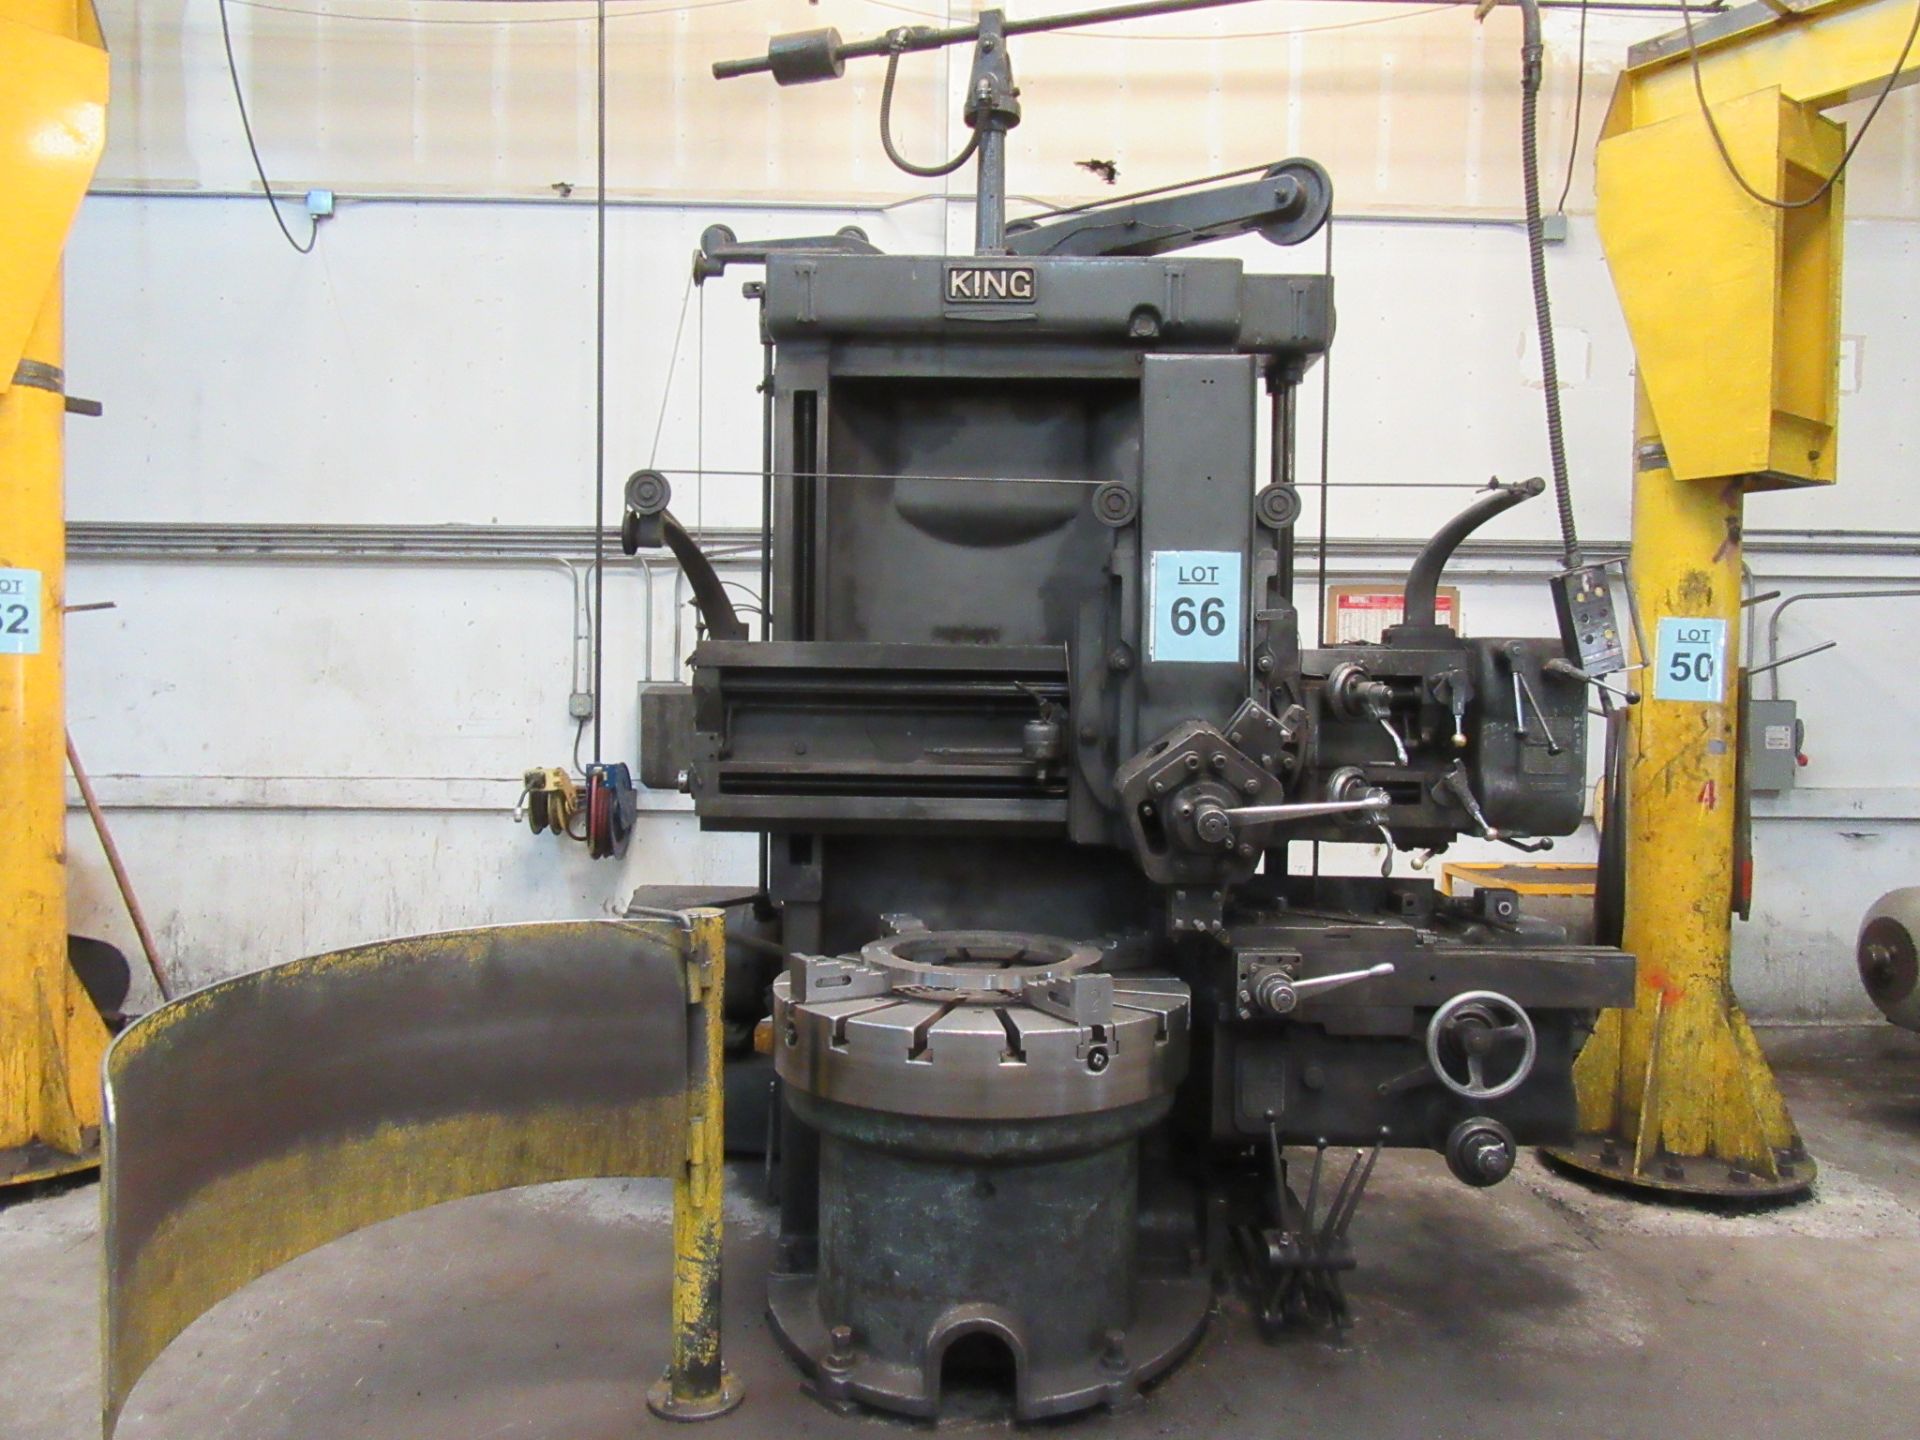 KING 42'' VERTICAL BORING MILL, 42'' TABLE WITH (4) JAWS, 5-POSITION TURRET